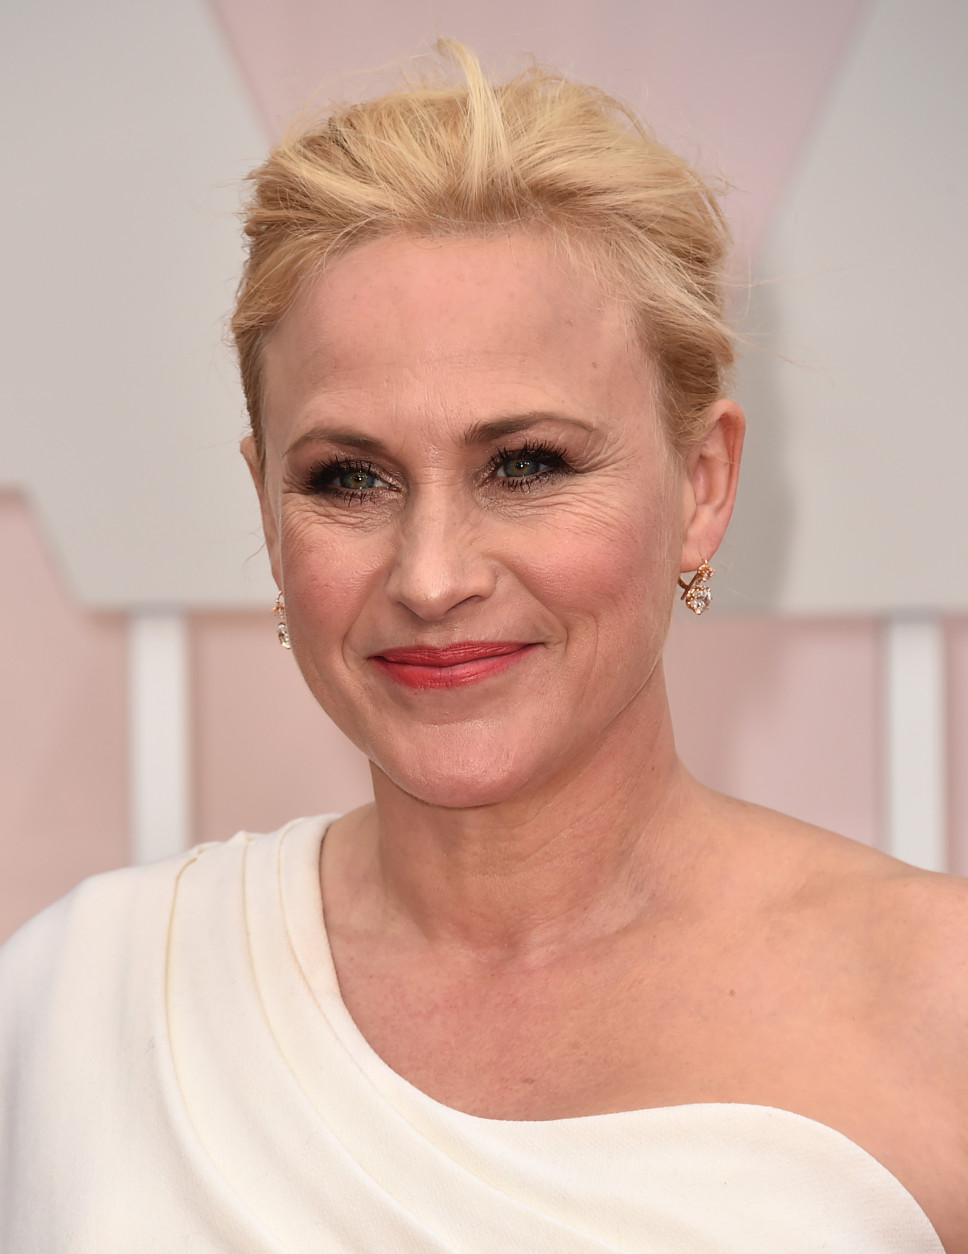 Patricia Arquette arrives at the Oscars on Sunday, Feb. 22, 2015, at the Dolby Theatre in Los Angeles. (Photo by Jordan Strauss/Invision/AP)